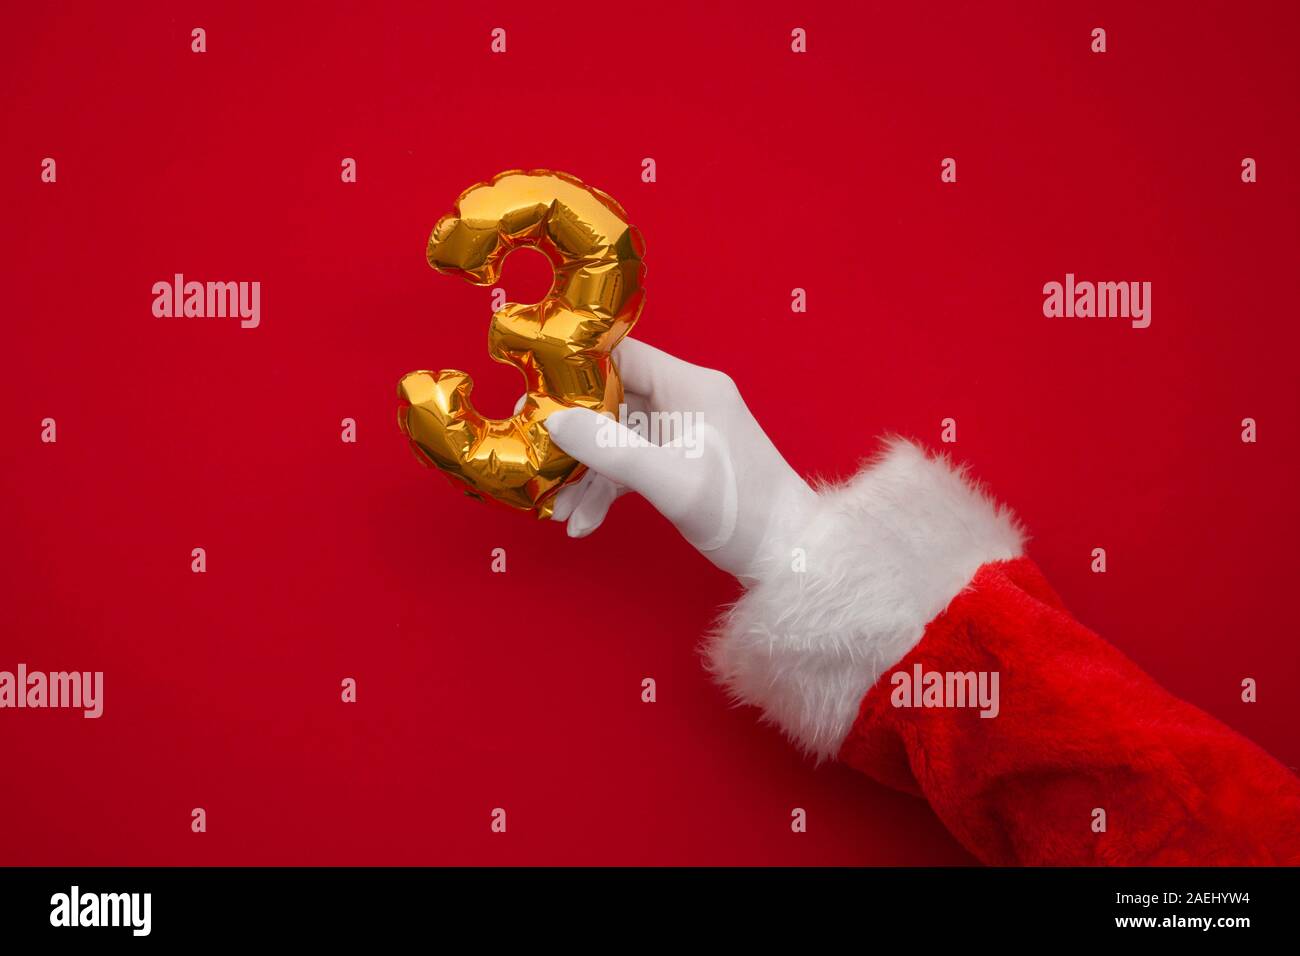 12 days of christmas. Santa hands holding 3rd day balloon on red background Stock Photo